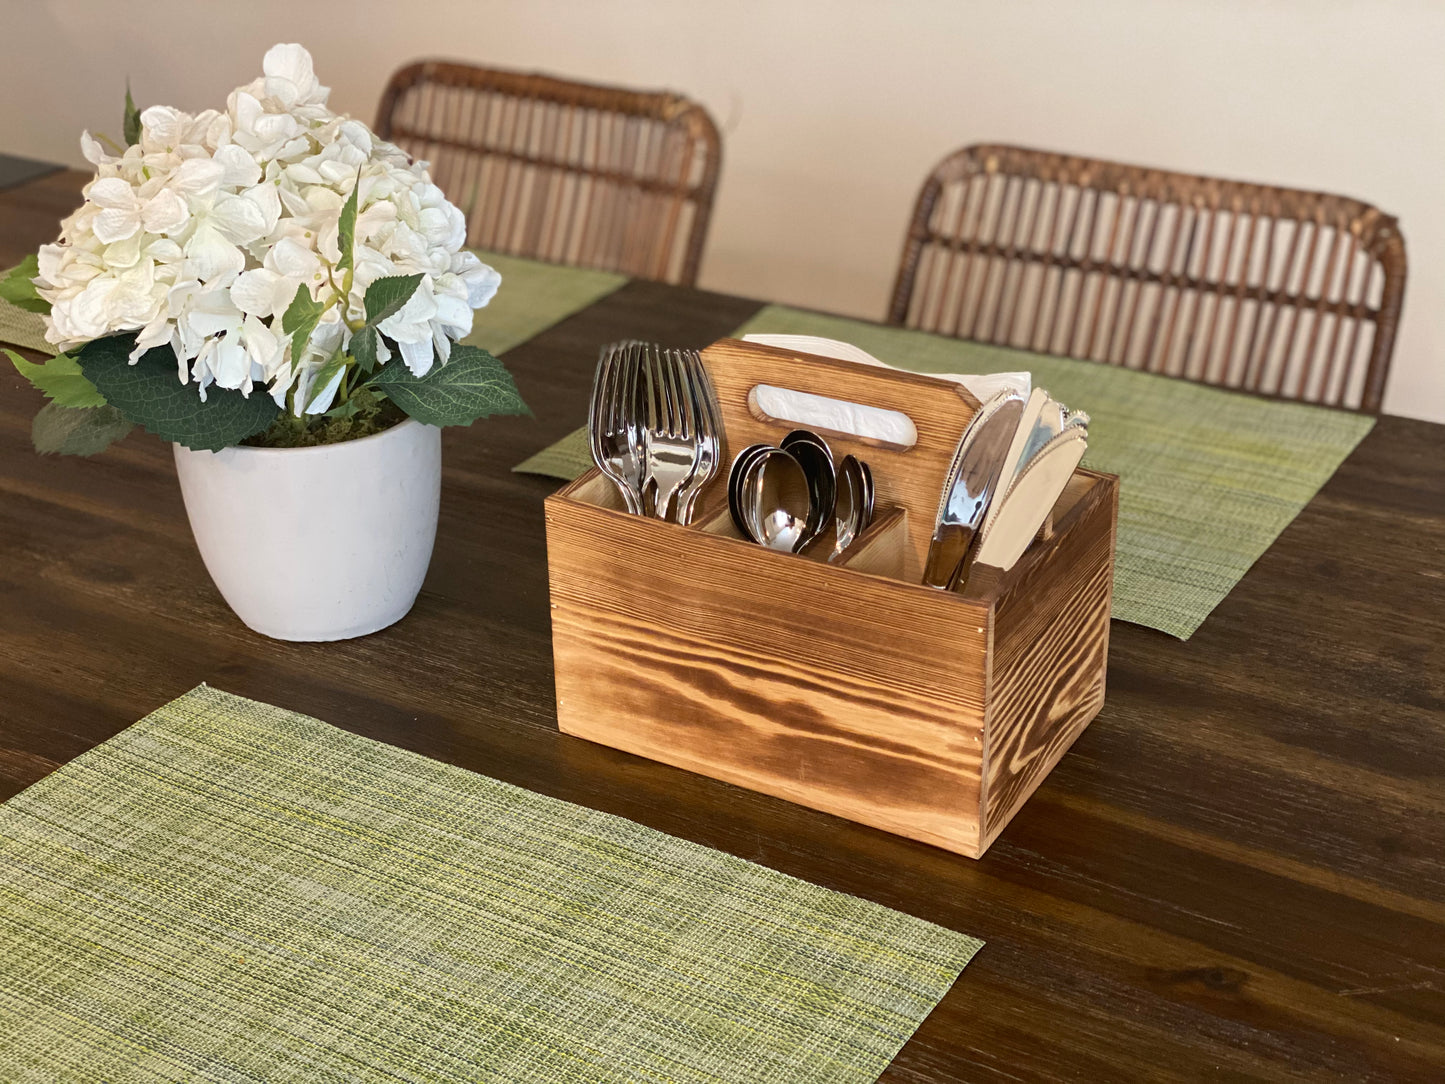 Utensil and Napkin Holder Flatware Caddy with Handle Rustic Wood